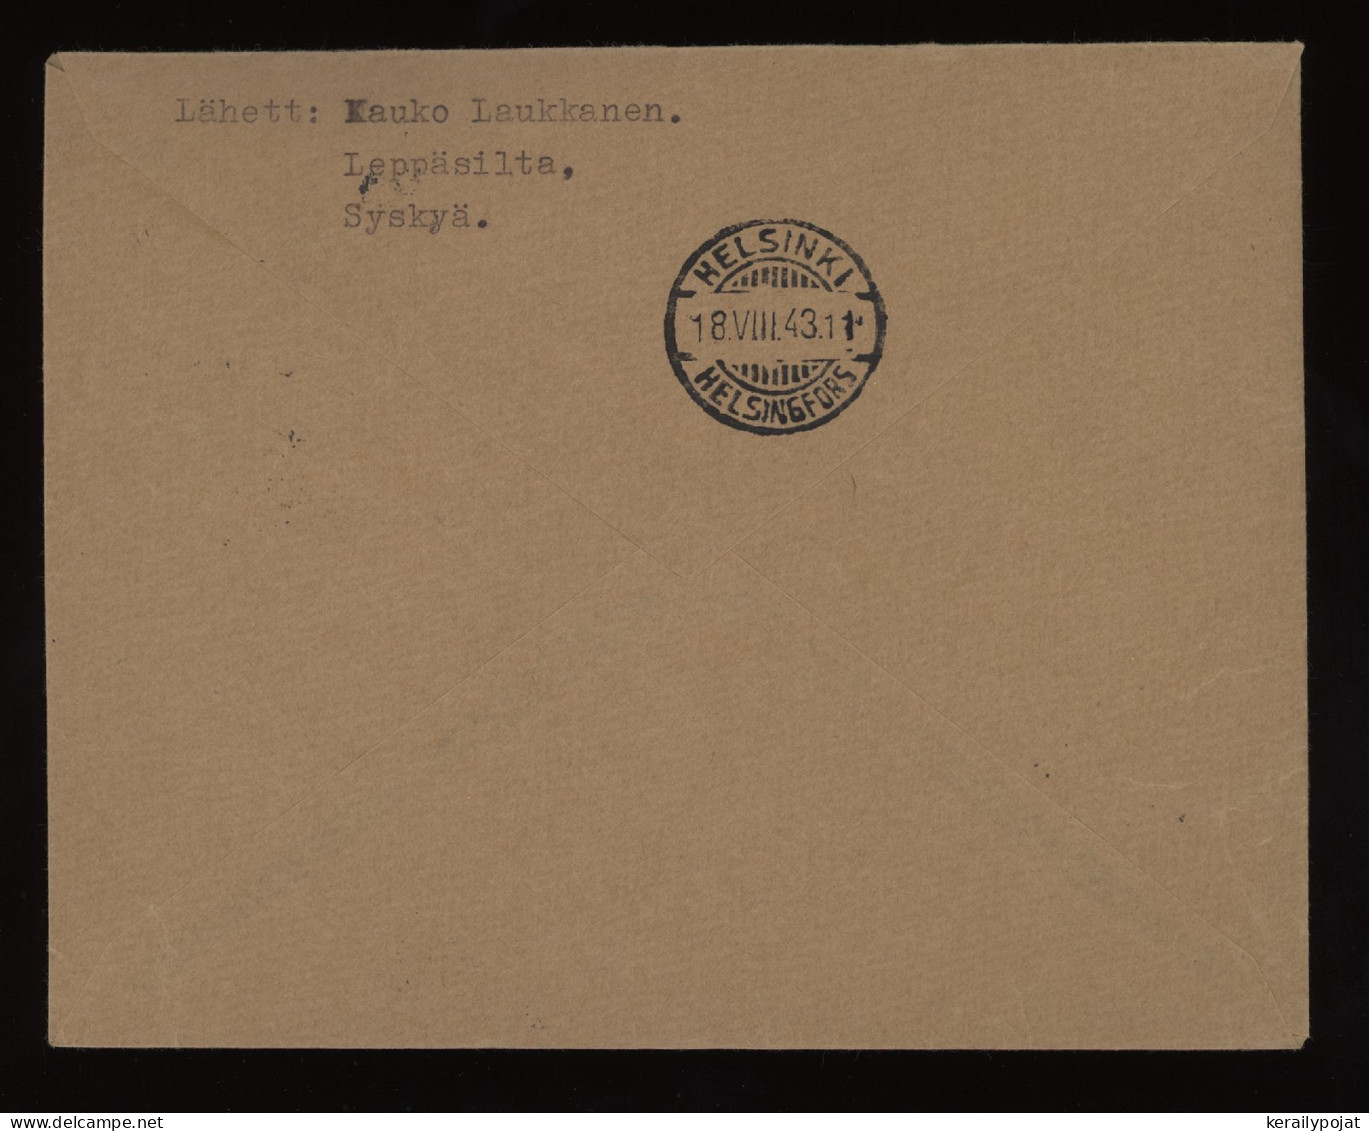 Finland 1943 Impilahti Registered Cover__(10361) - Covers & Documents